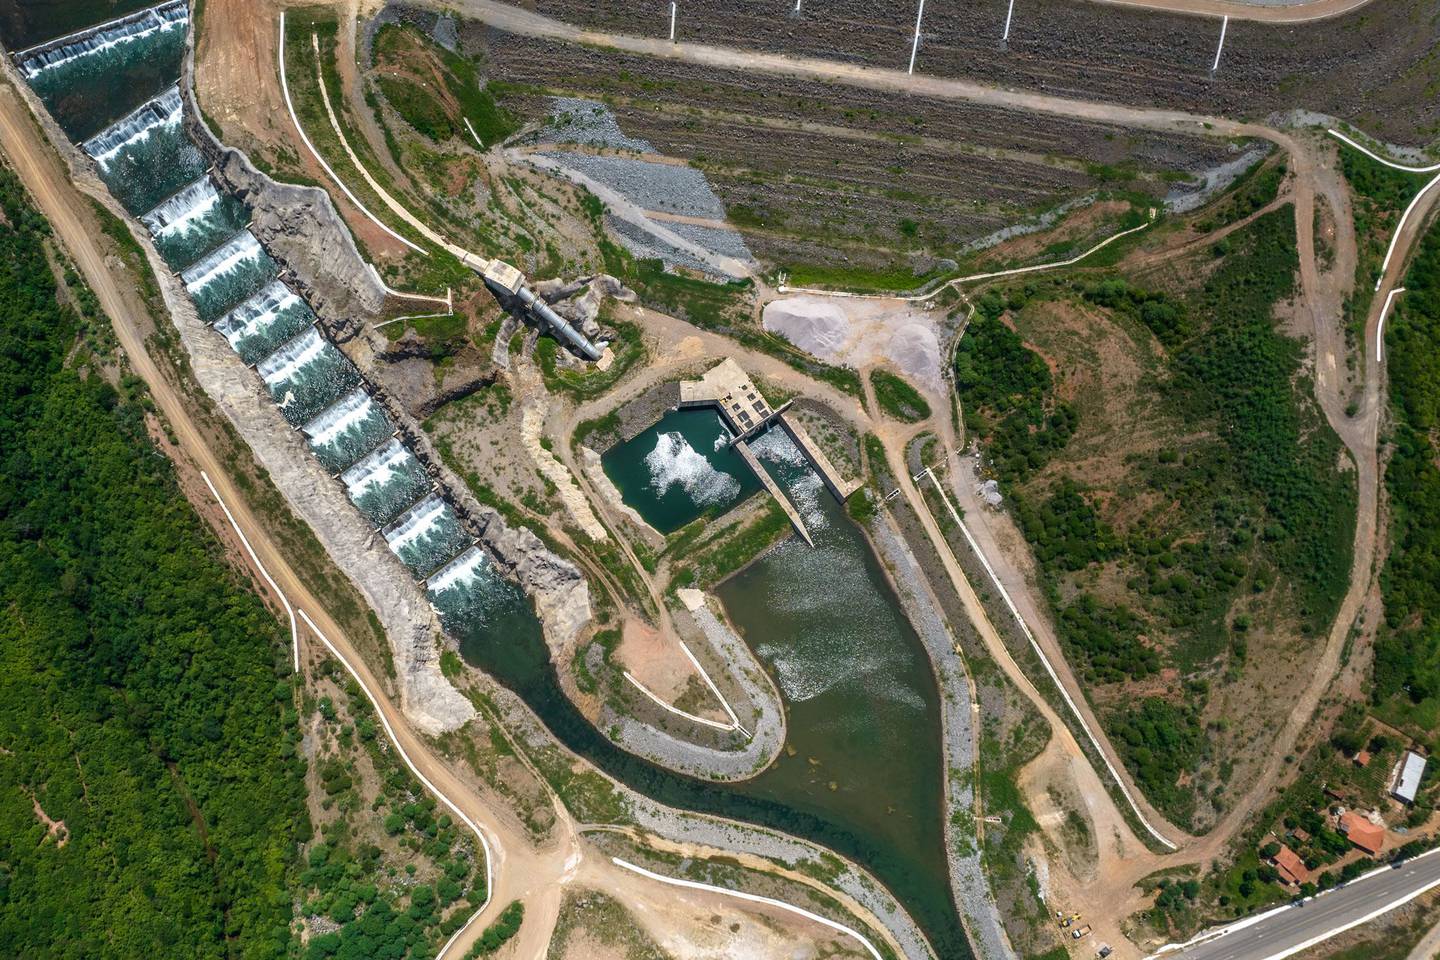 Part of the Sao Francisco River irrigation project near Penaforte in Ceara. Photographer: Jonne Roriz/Bloombergdfd